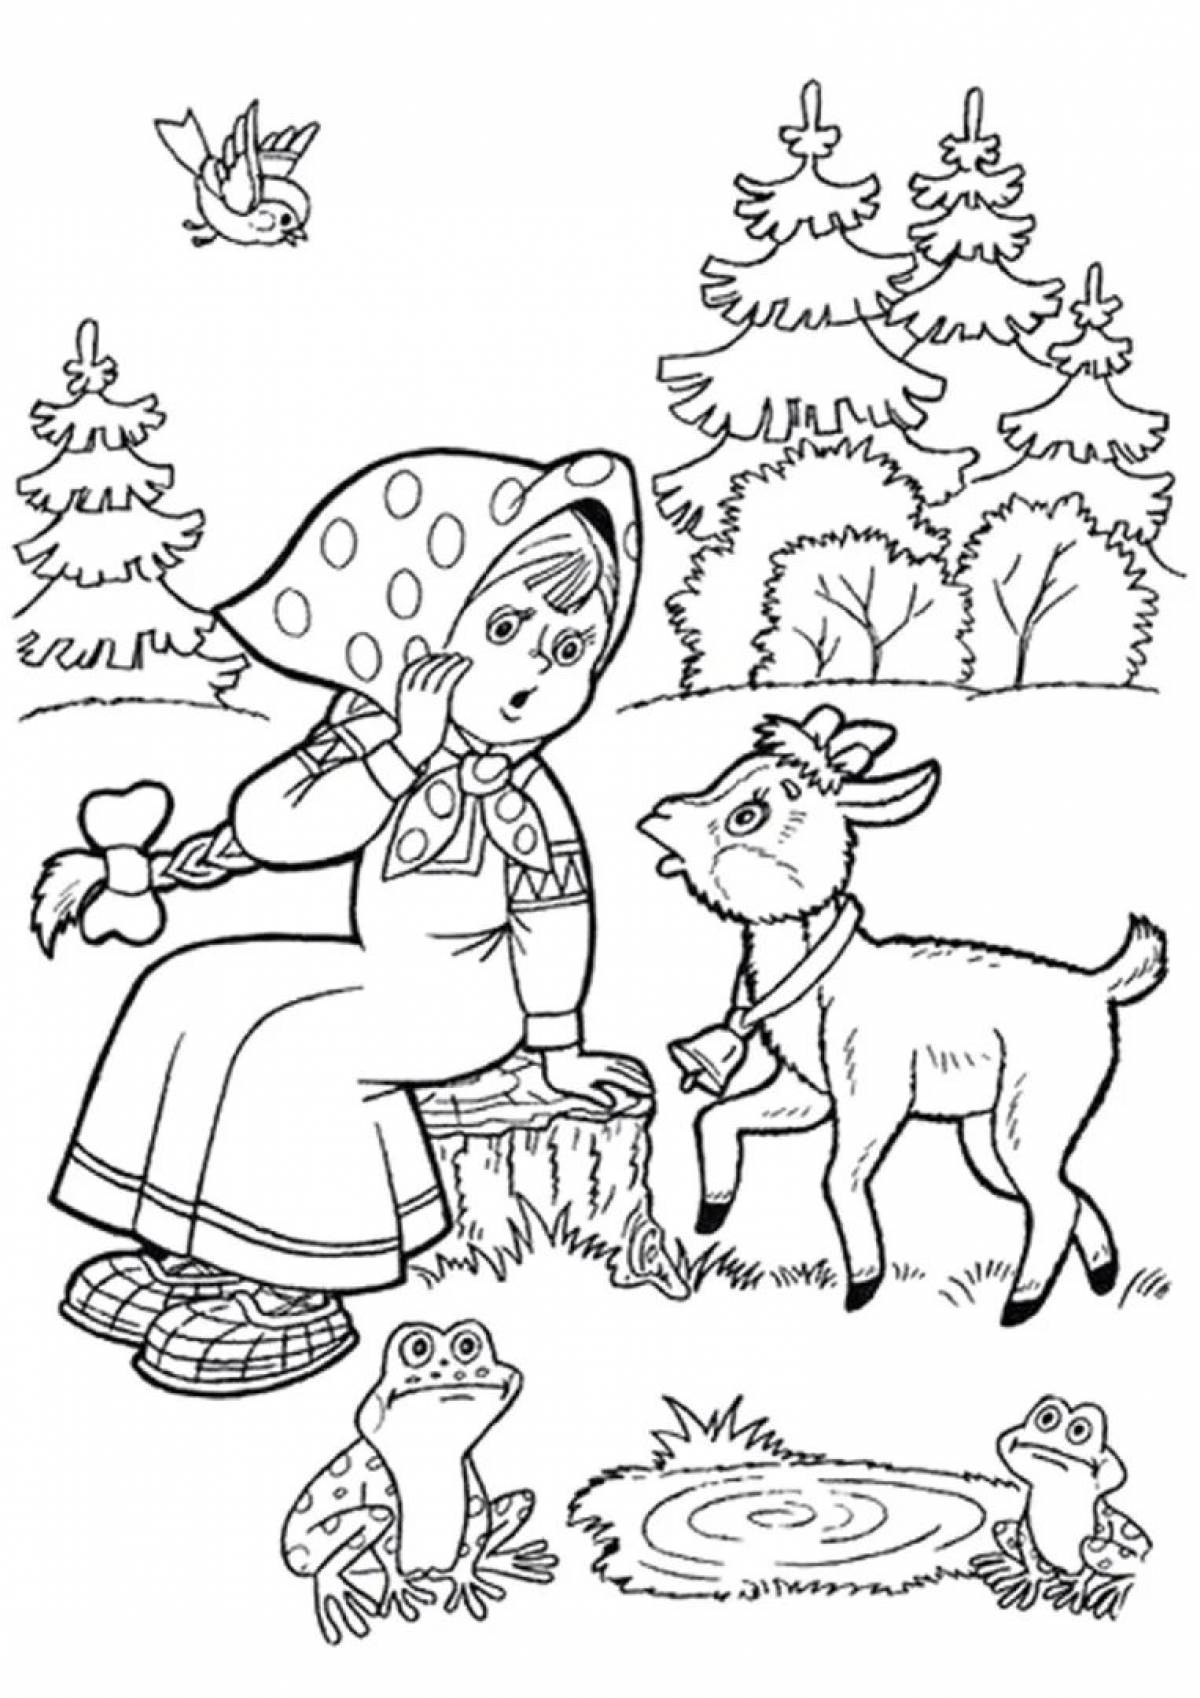 Great fairy tale coloring book for kids russian folk